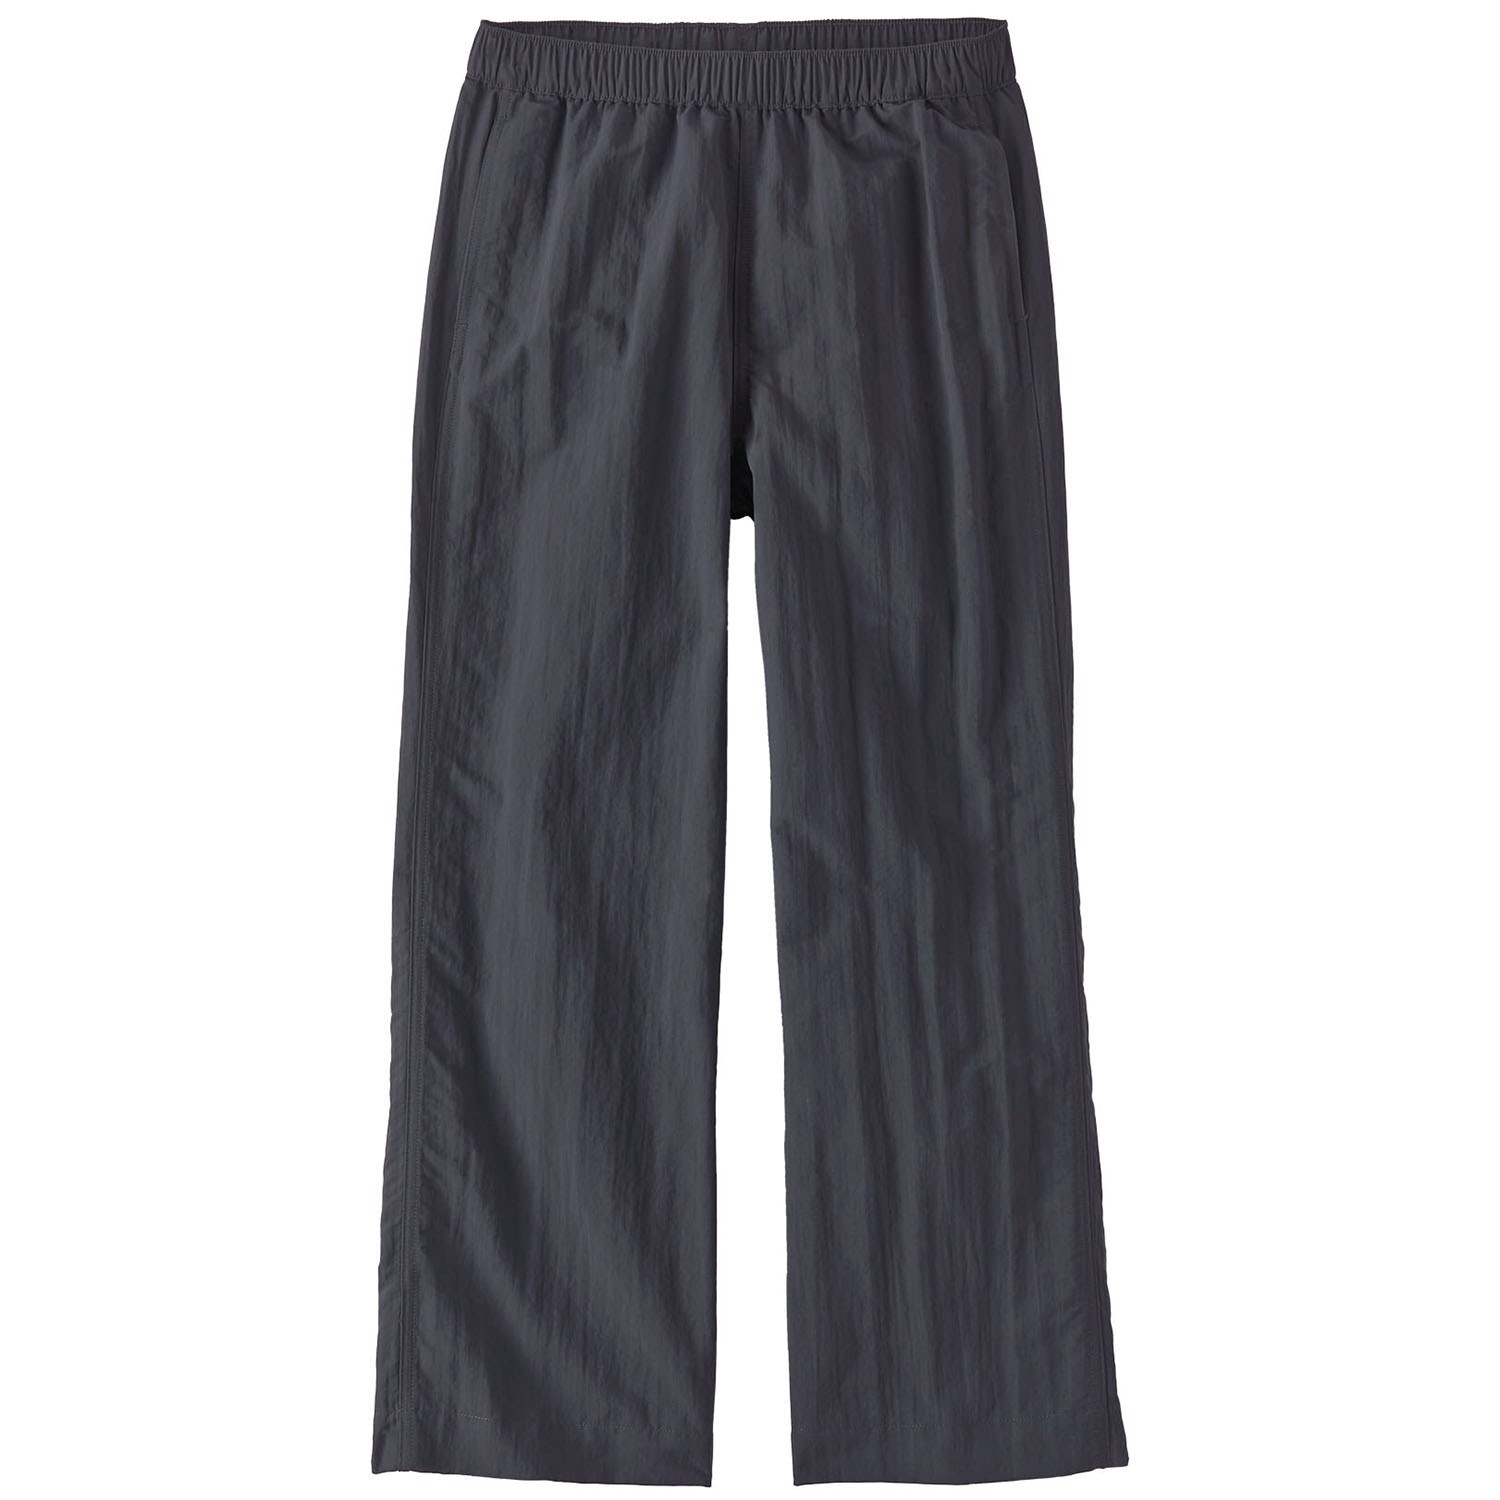 Patagonia Outdoor Everyday Pants - Casual trousers Women's